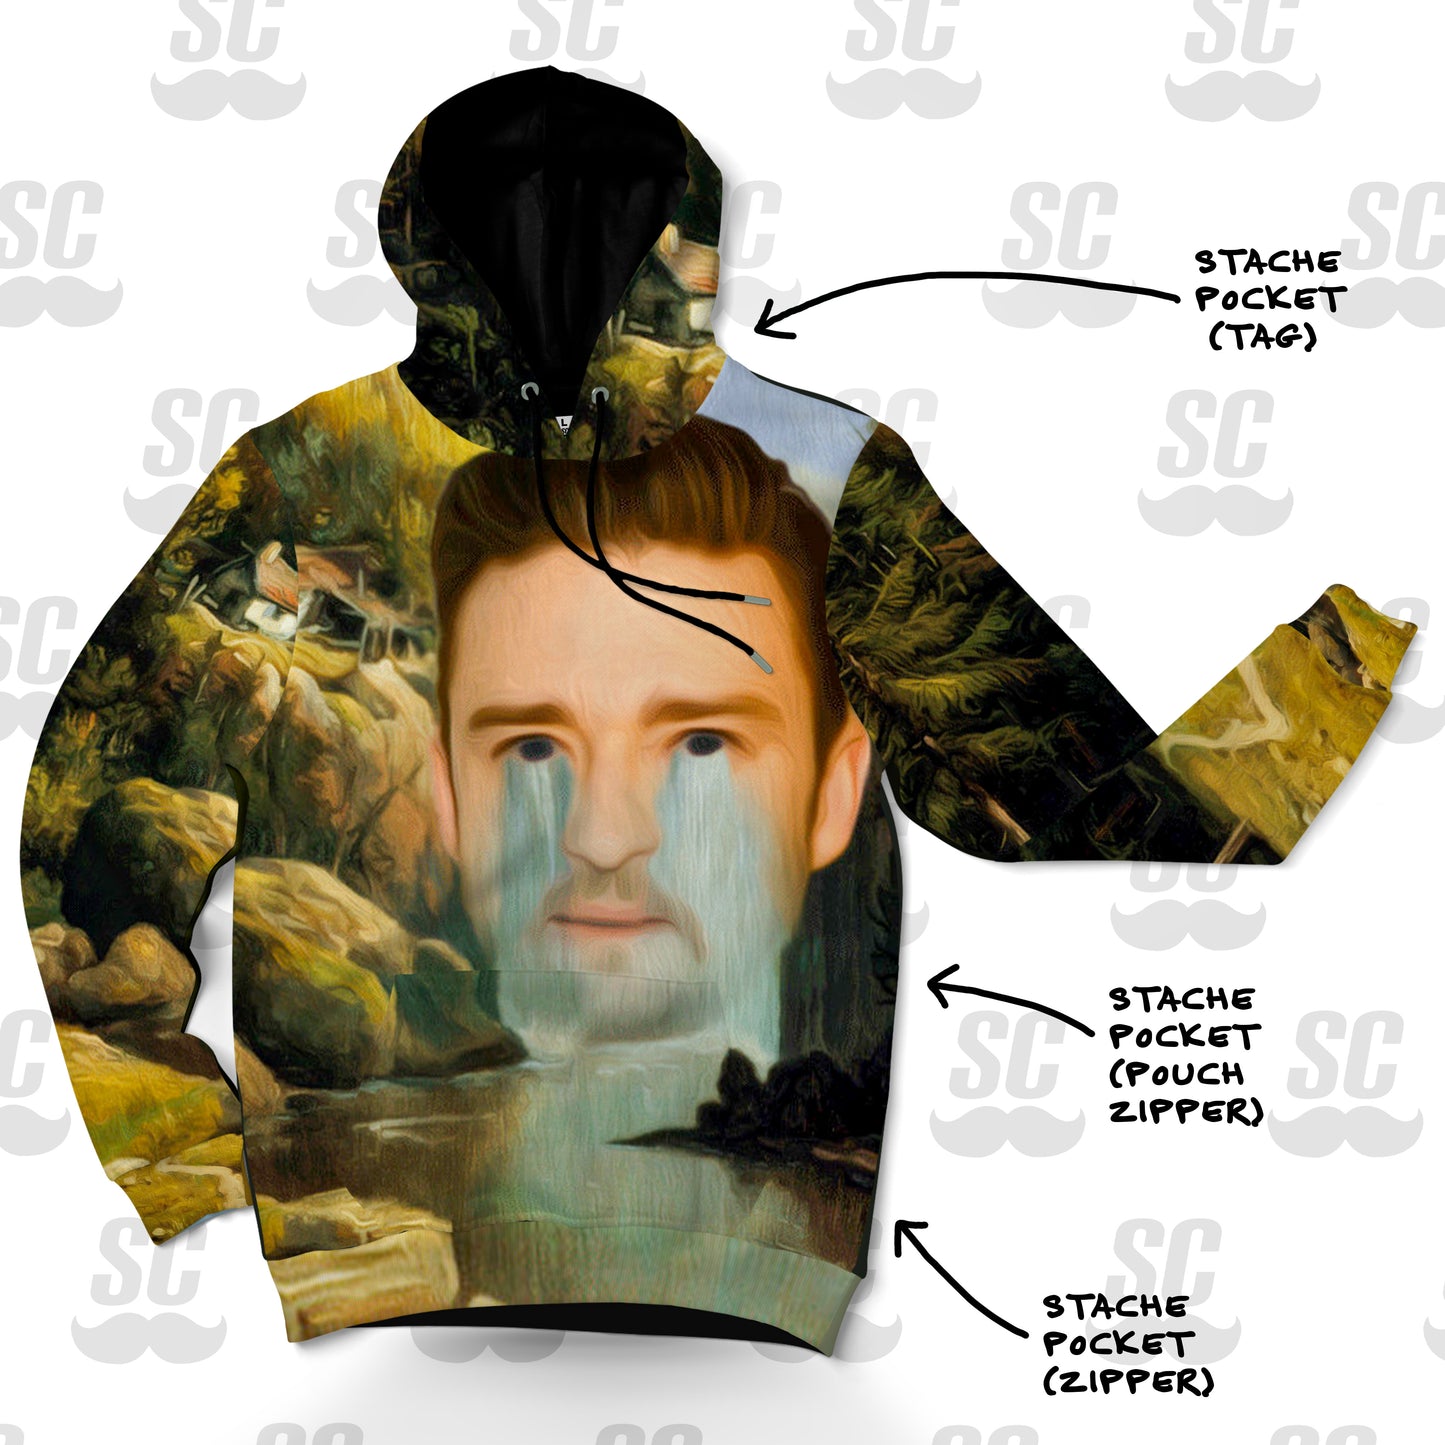 Cry Me A River Hoodie